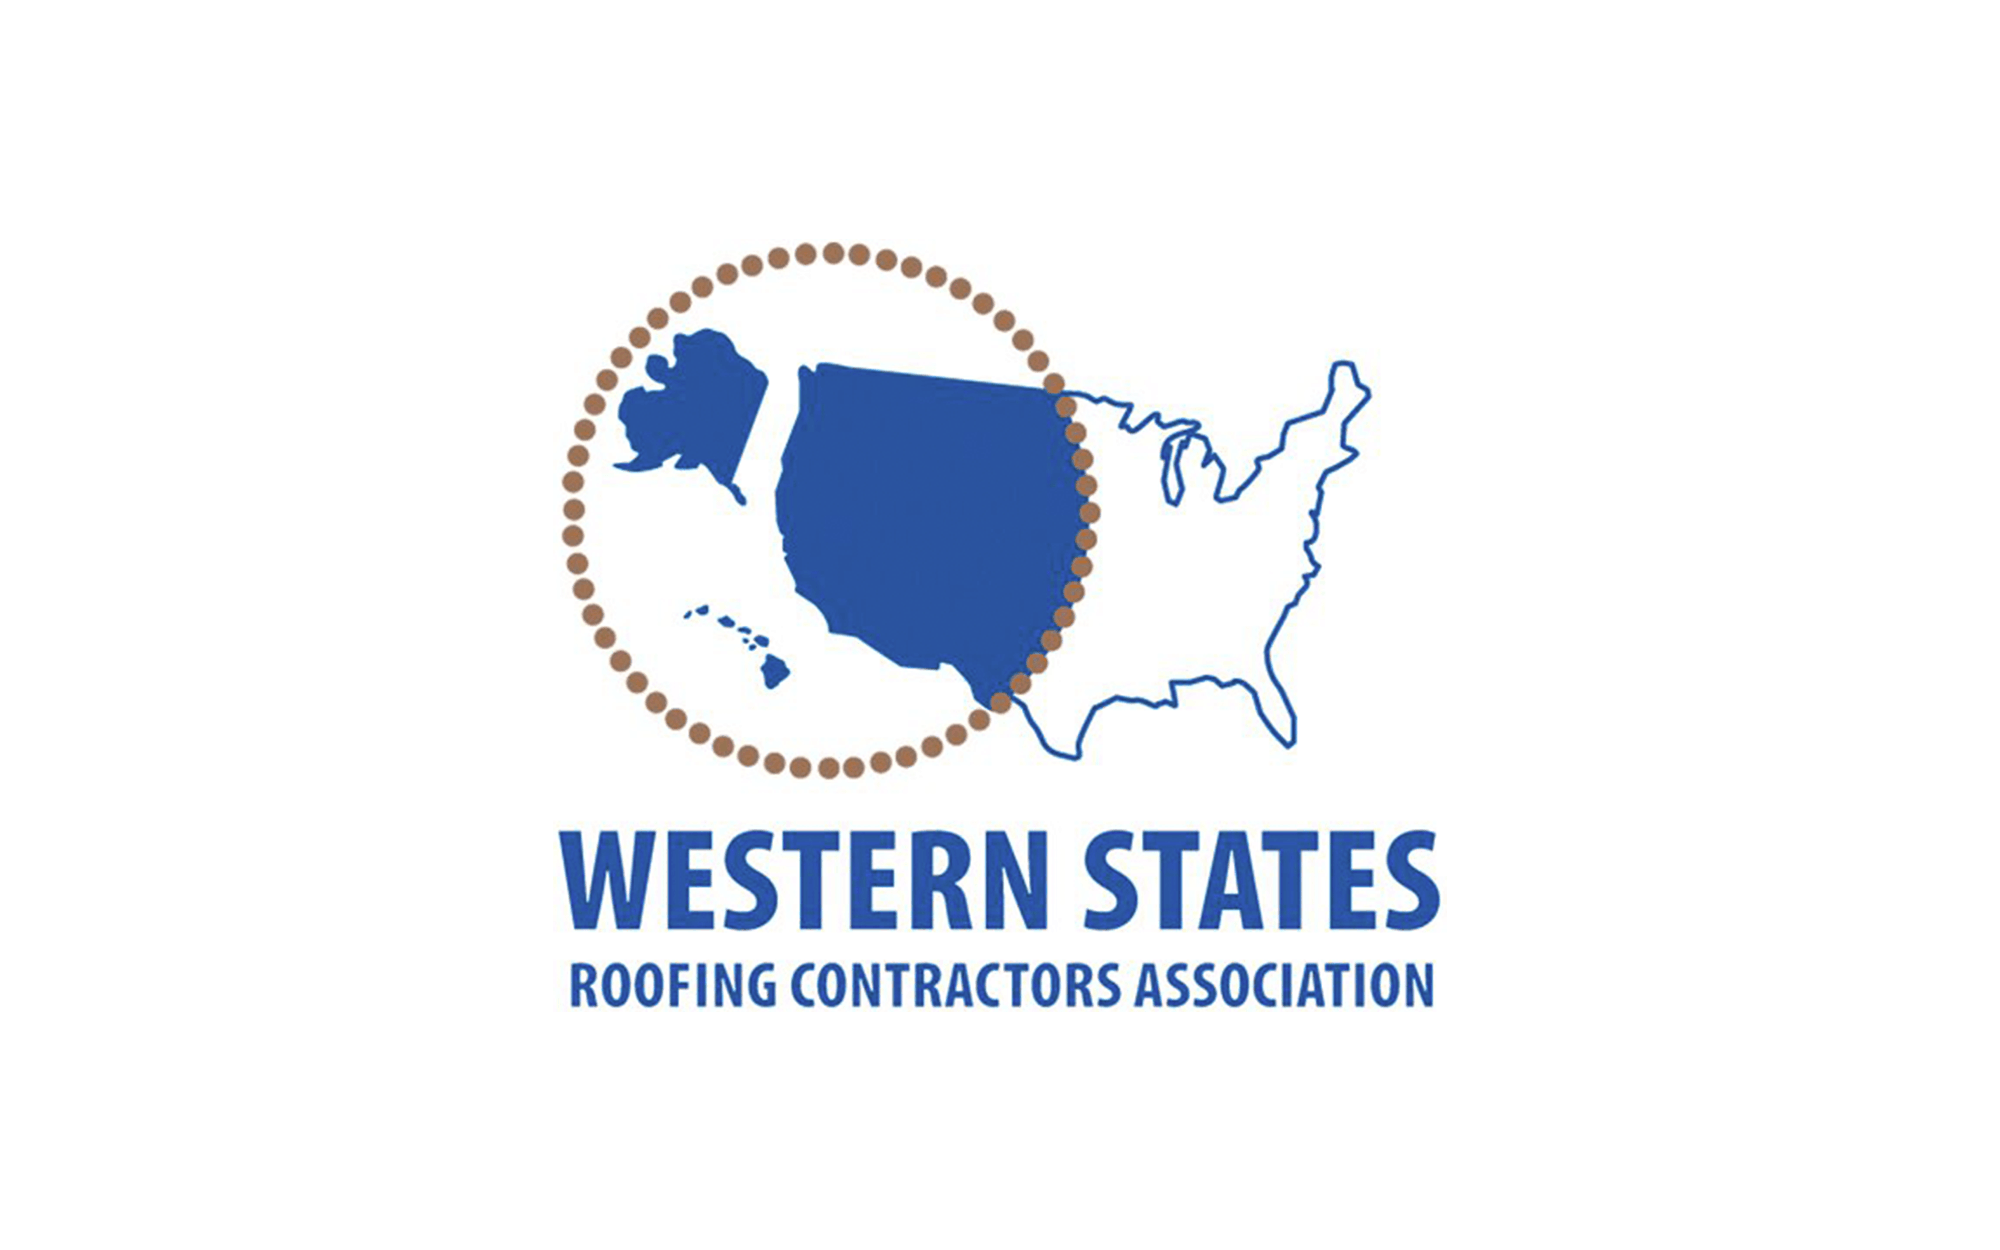 Western States Roofing Contractors Association logo